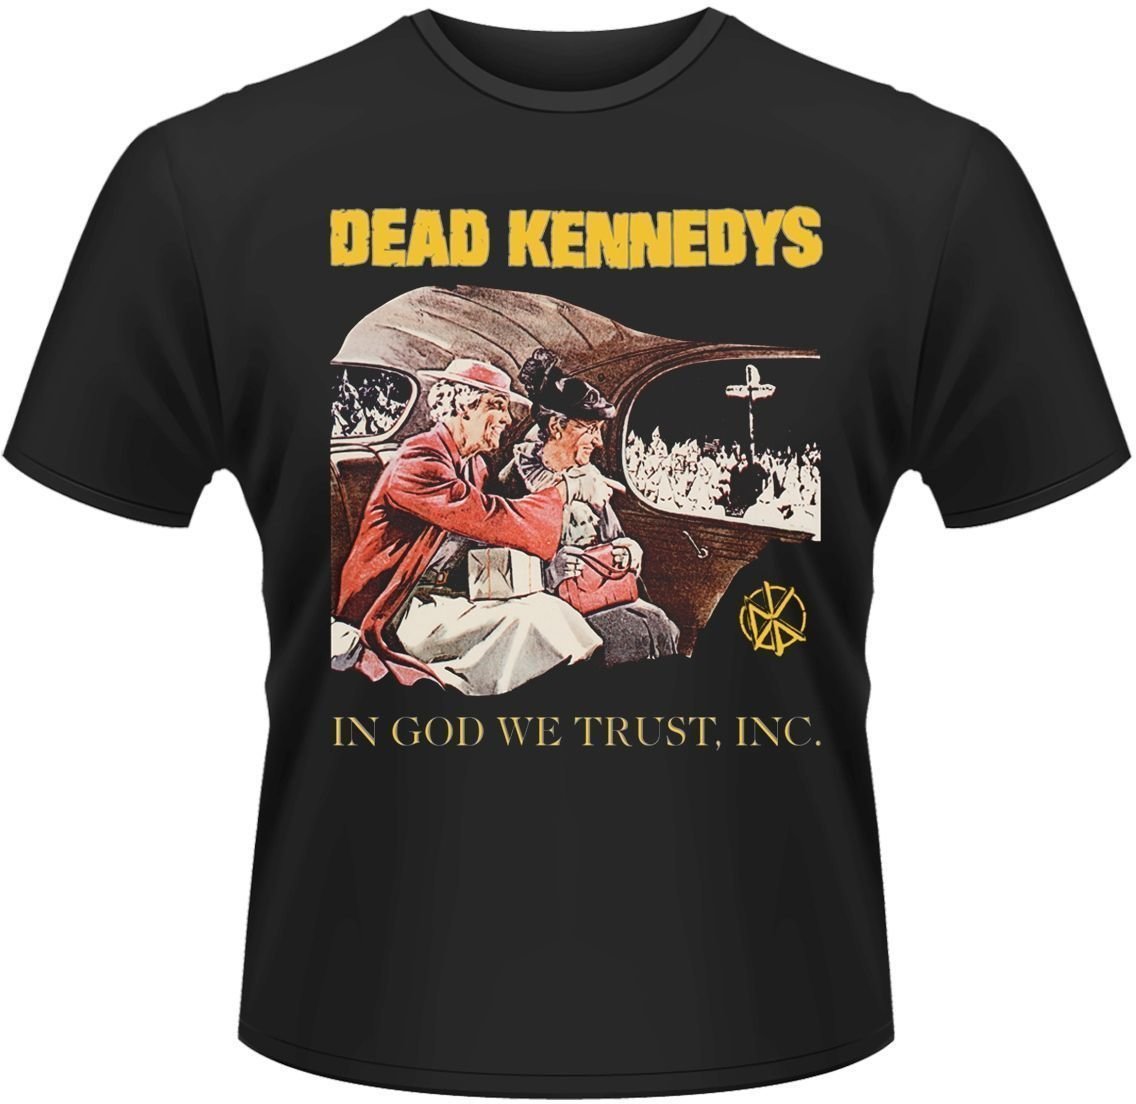 T-Shirt Dead Kennedys T-Shirt In God We Trust Black XL (Just unboxed)